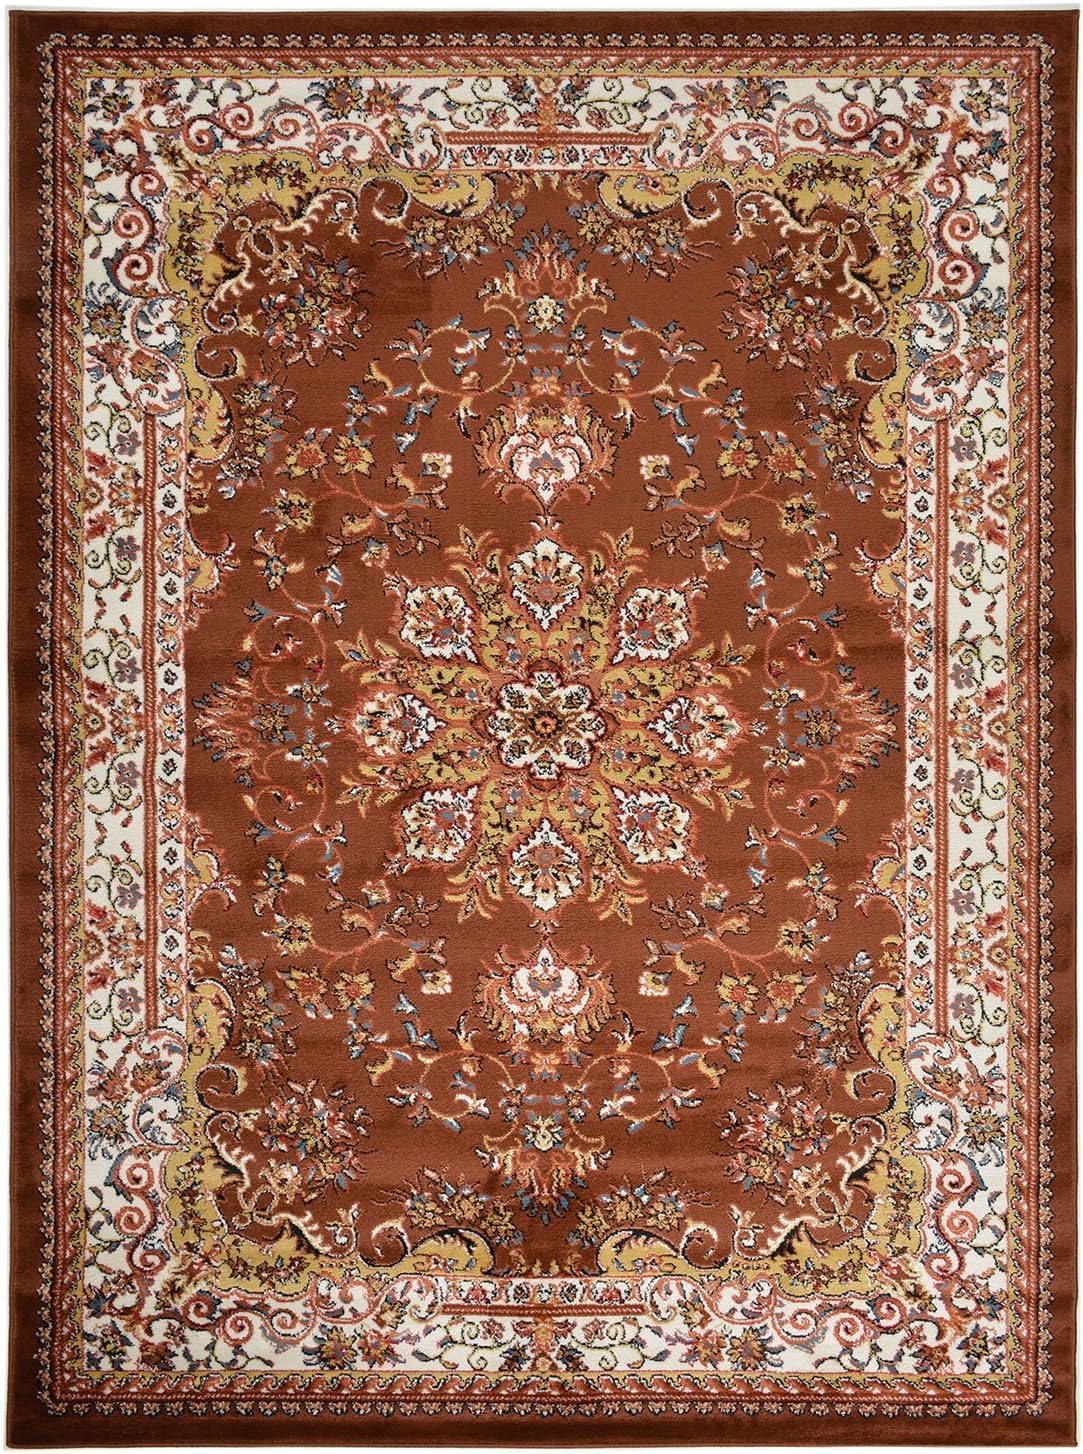 Nevita Collection Isfahan Persian Traditional Medallion Design Area Rug (Brown, 5' 3" x 7' 1")